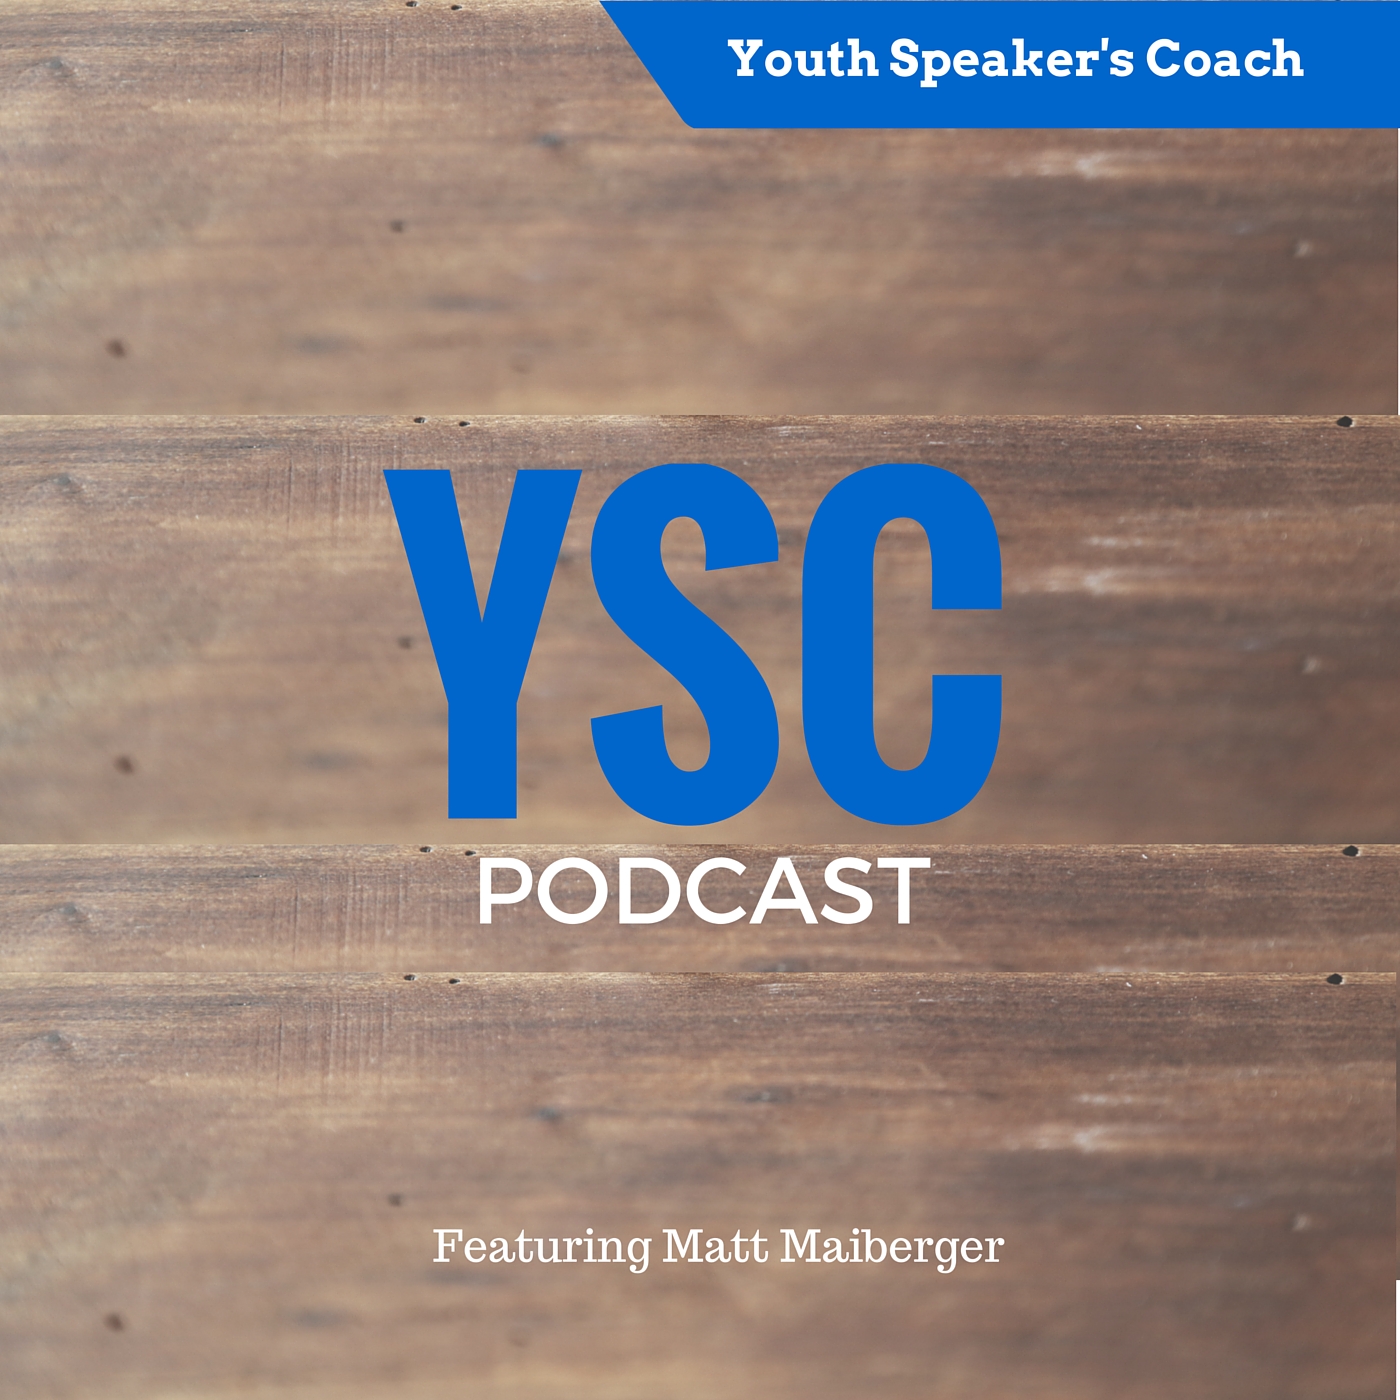 Youth Speaker's Coach Podcast